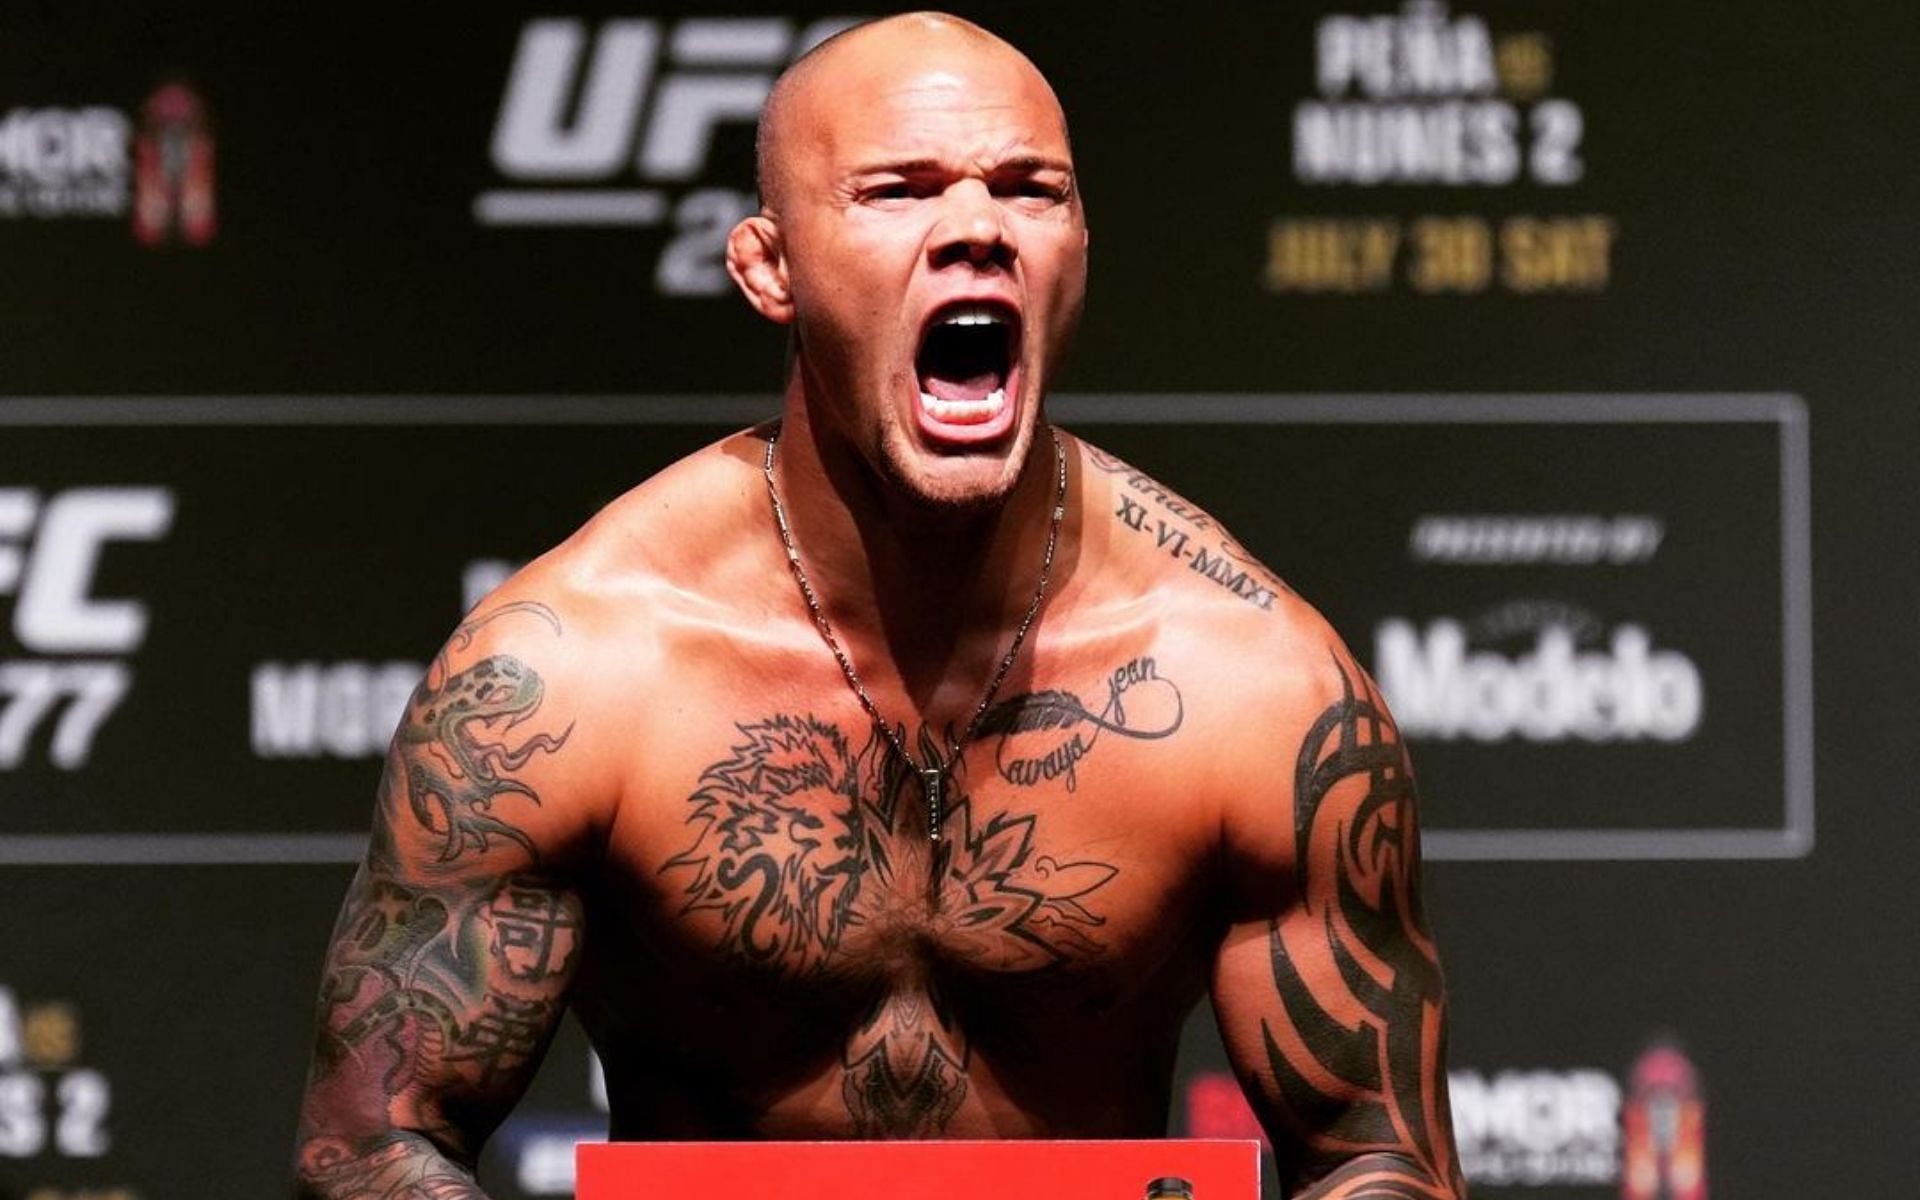 Anthony Smith voices frustration over fans